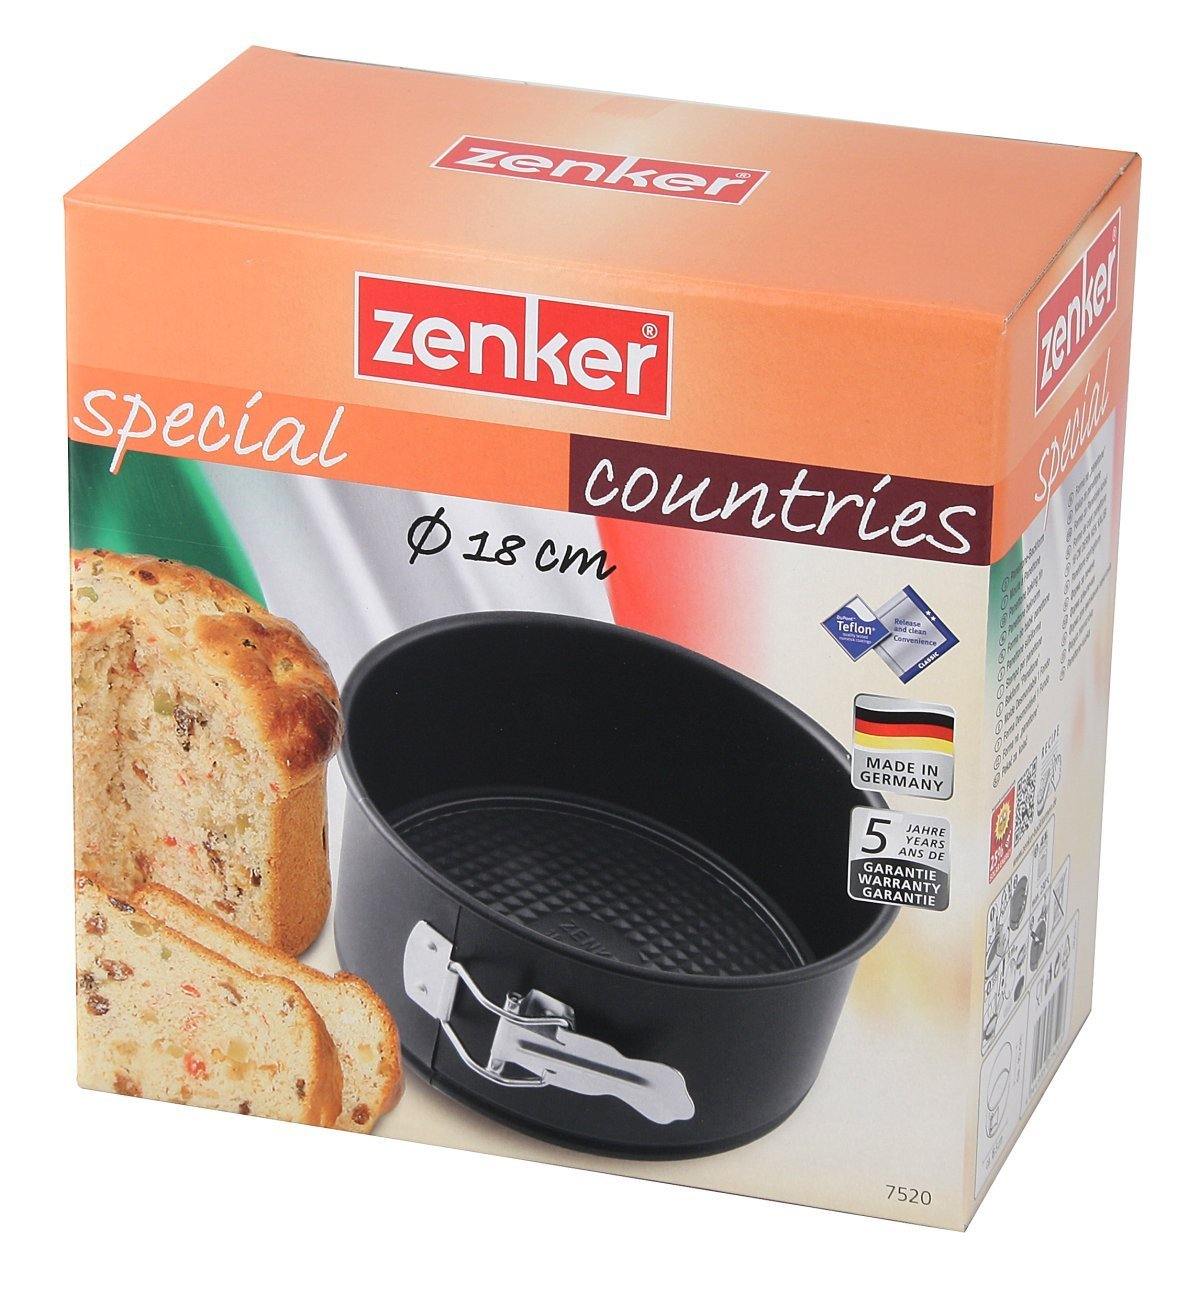 Zenker  "Special Countries" Panettone Cake Tin, Black, 18.5X10 cm - Whole and All